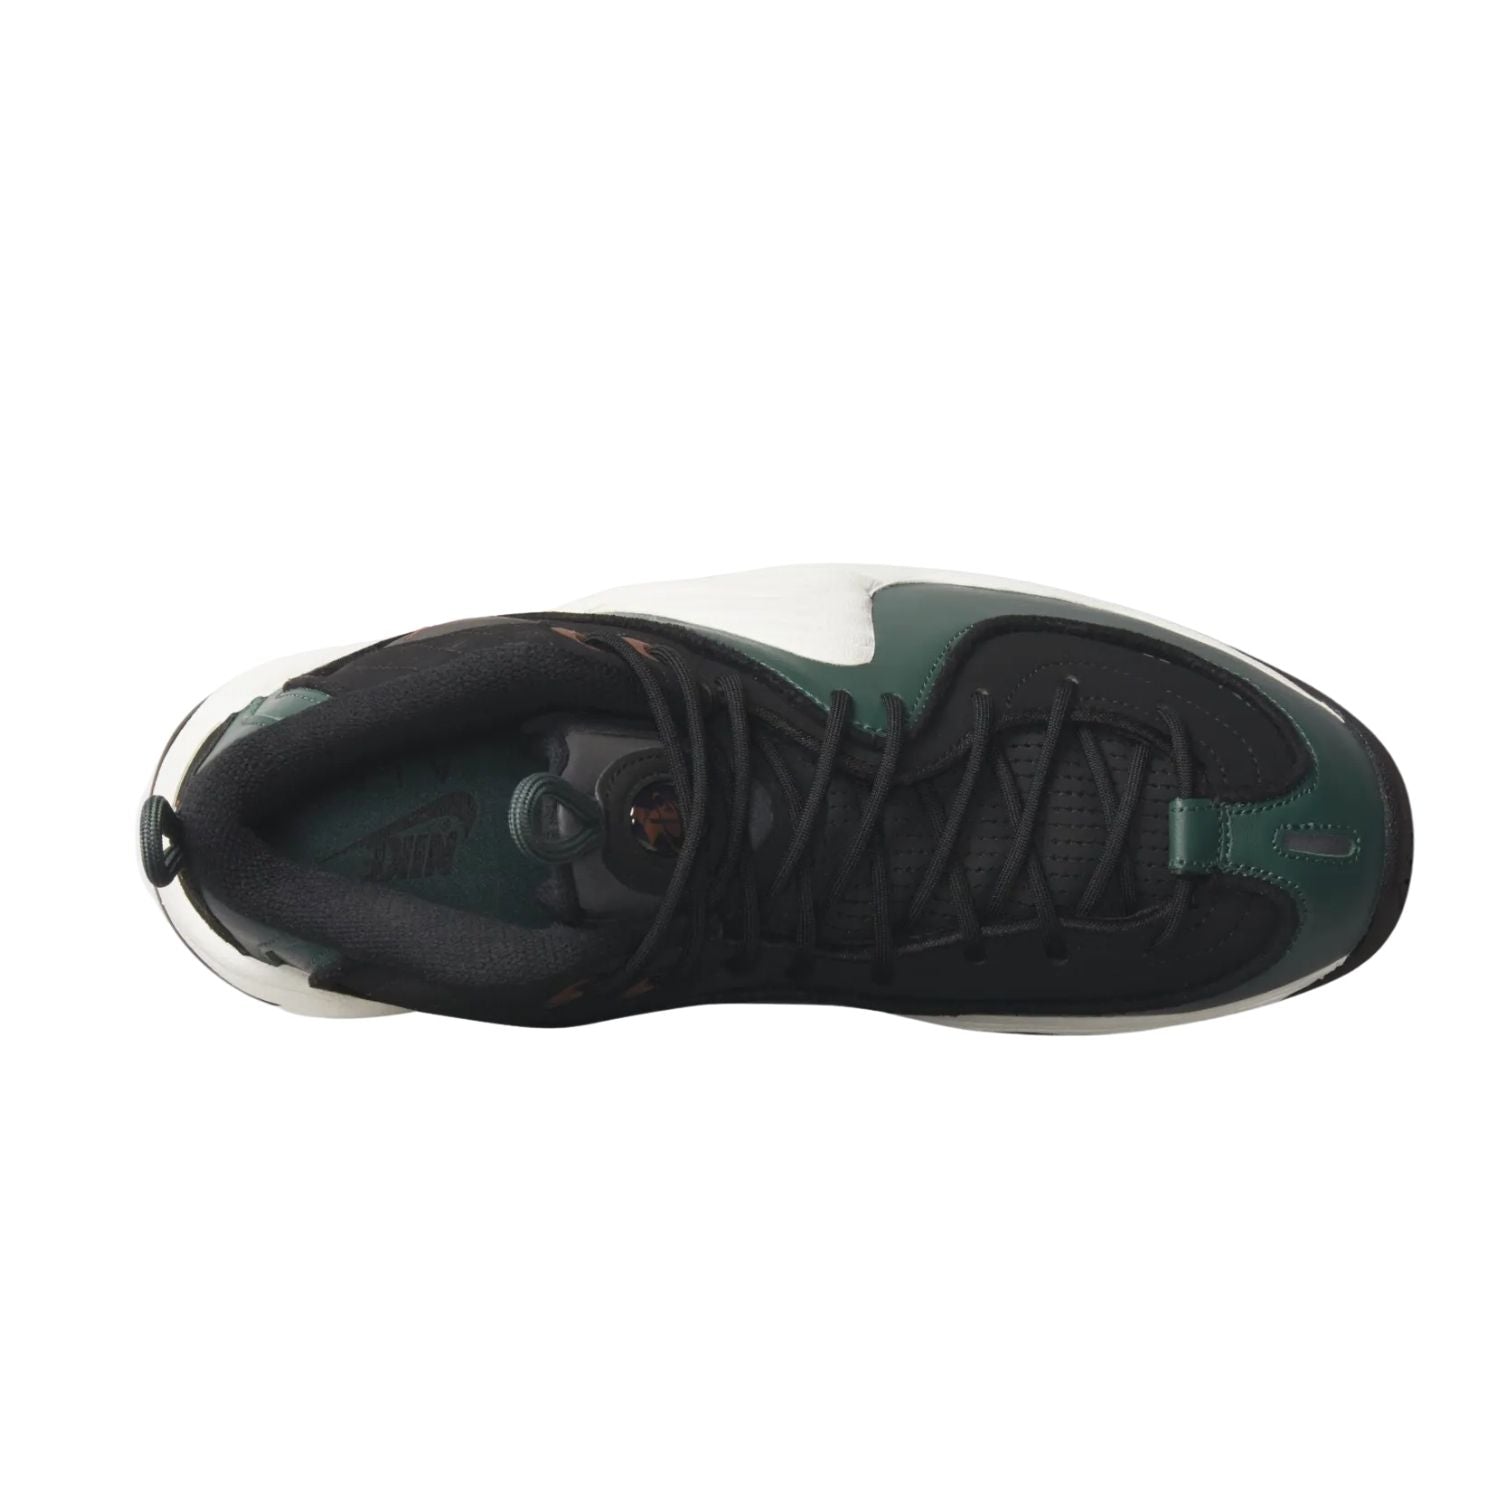 Nike Air Penny 2 Black Faded Spruce